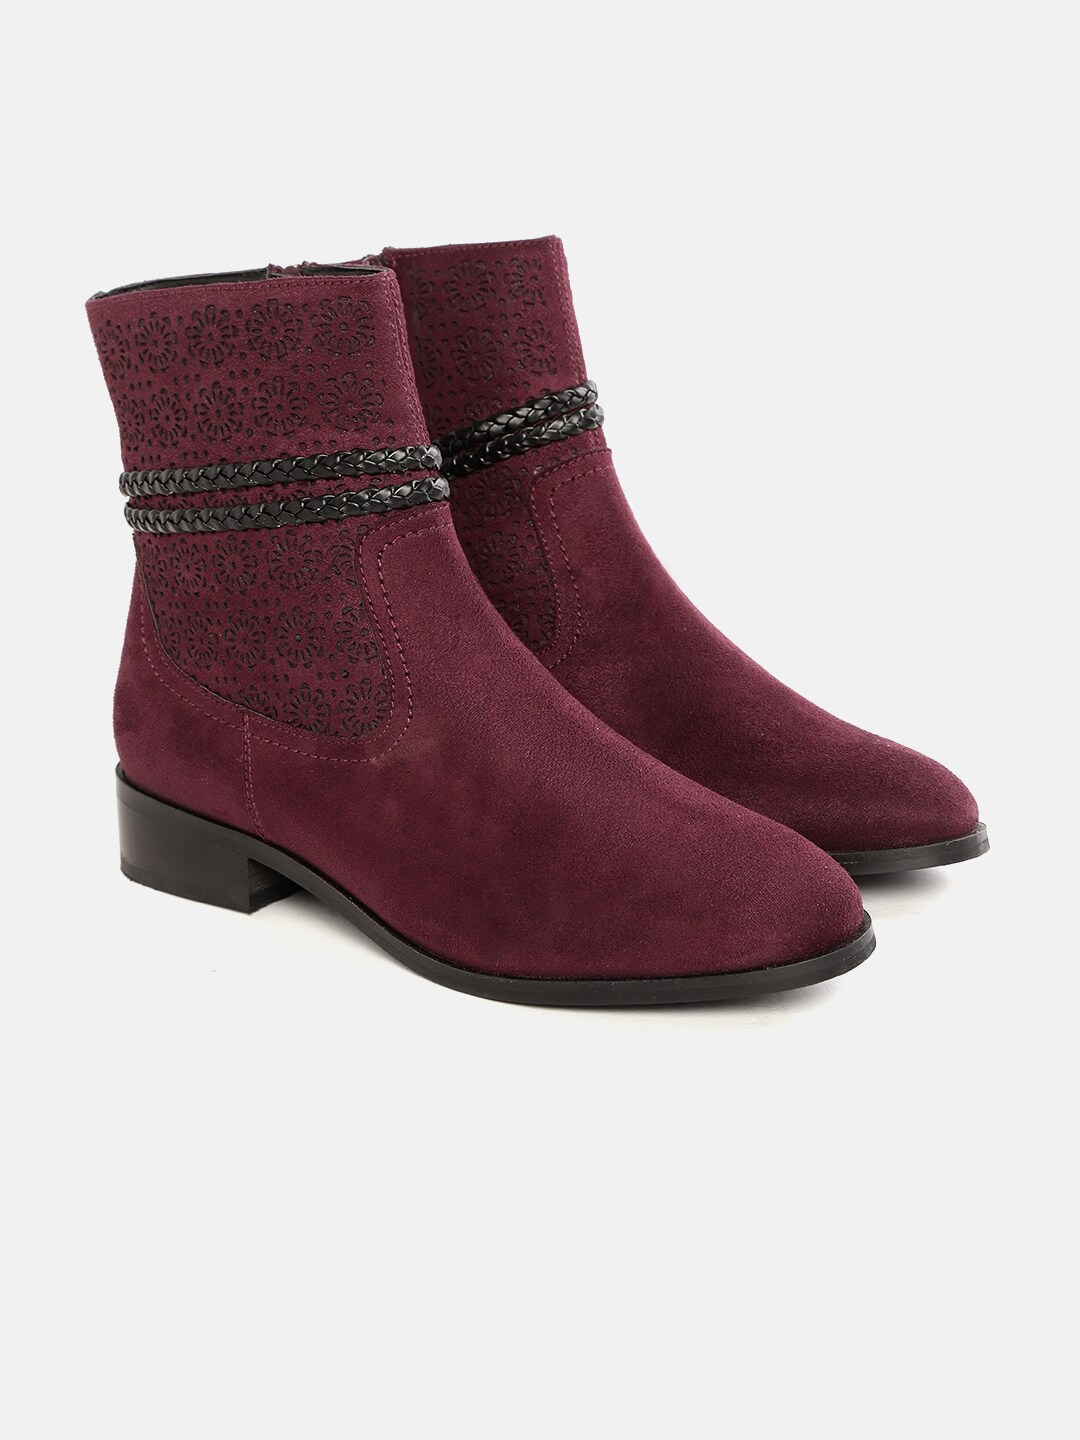 CORSICA Women Burgundy Suede Finish Laser Cut Mid-Top Flat Boots Price in India